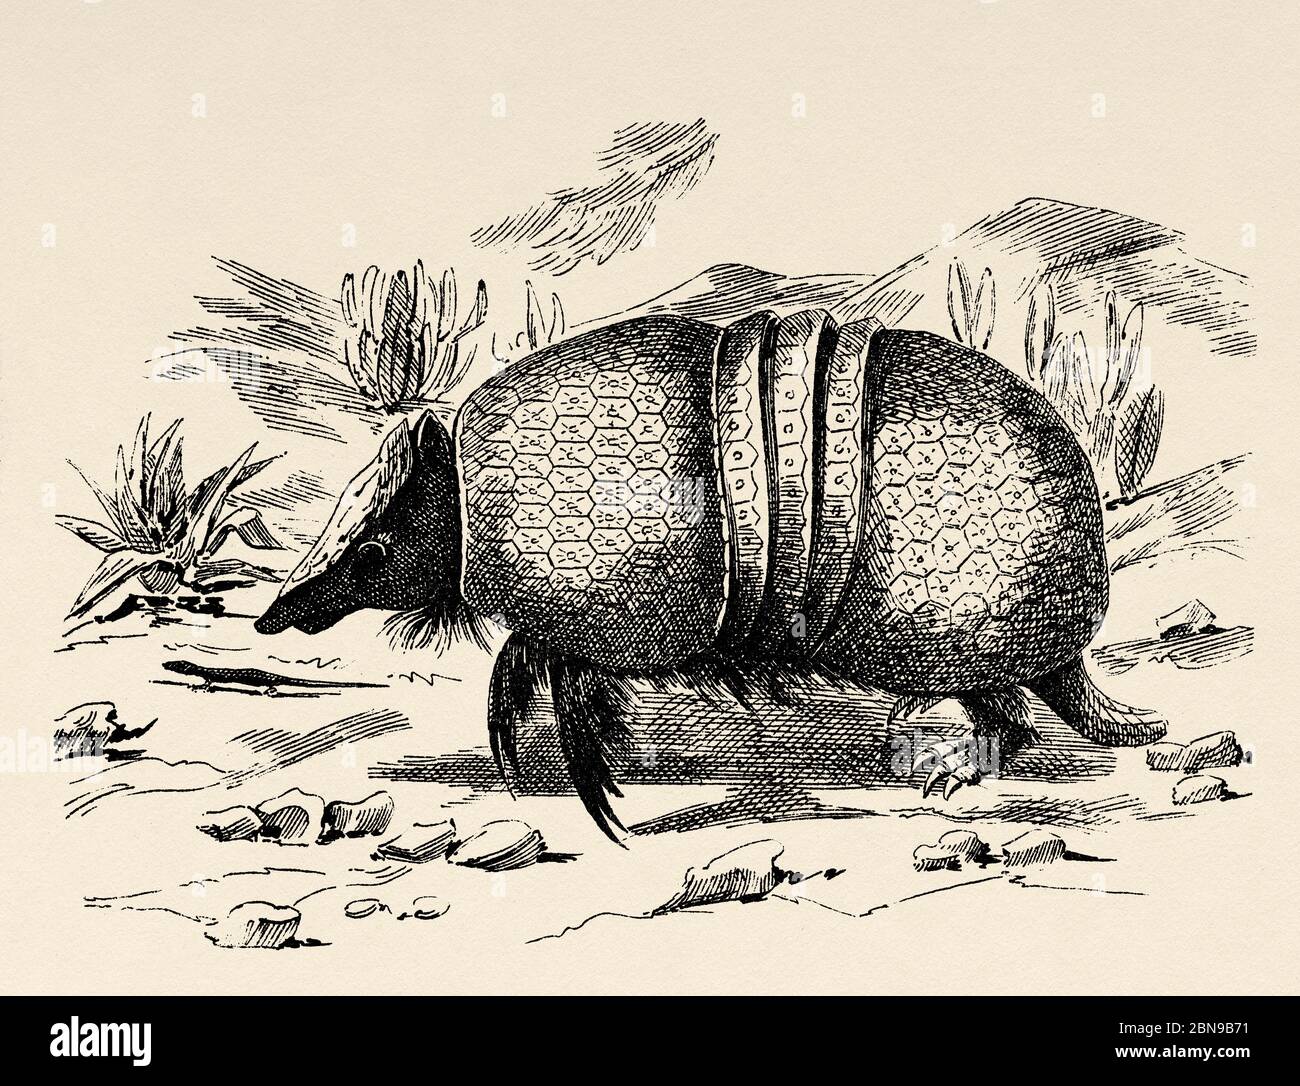 Tolypeutes matacus, known as Corechi, Mataco Bola, Quirquincho Bola or Tatu Bolita, is a kind of armadillo, belongs to the Tolypeutes genus. Native to Argentina, Brazil, Bolivia and Paraguay. Old engraved animal illustration 19th century Stock Photo